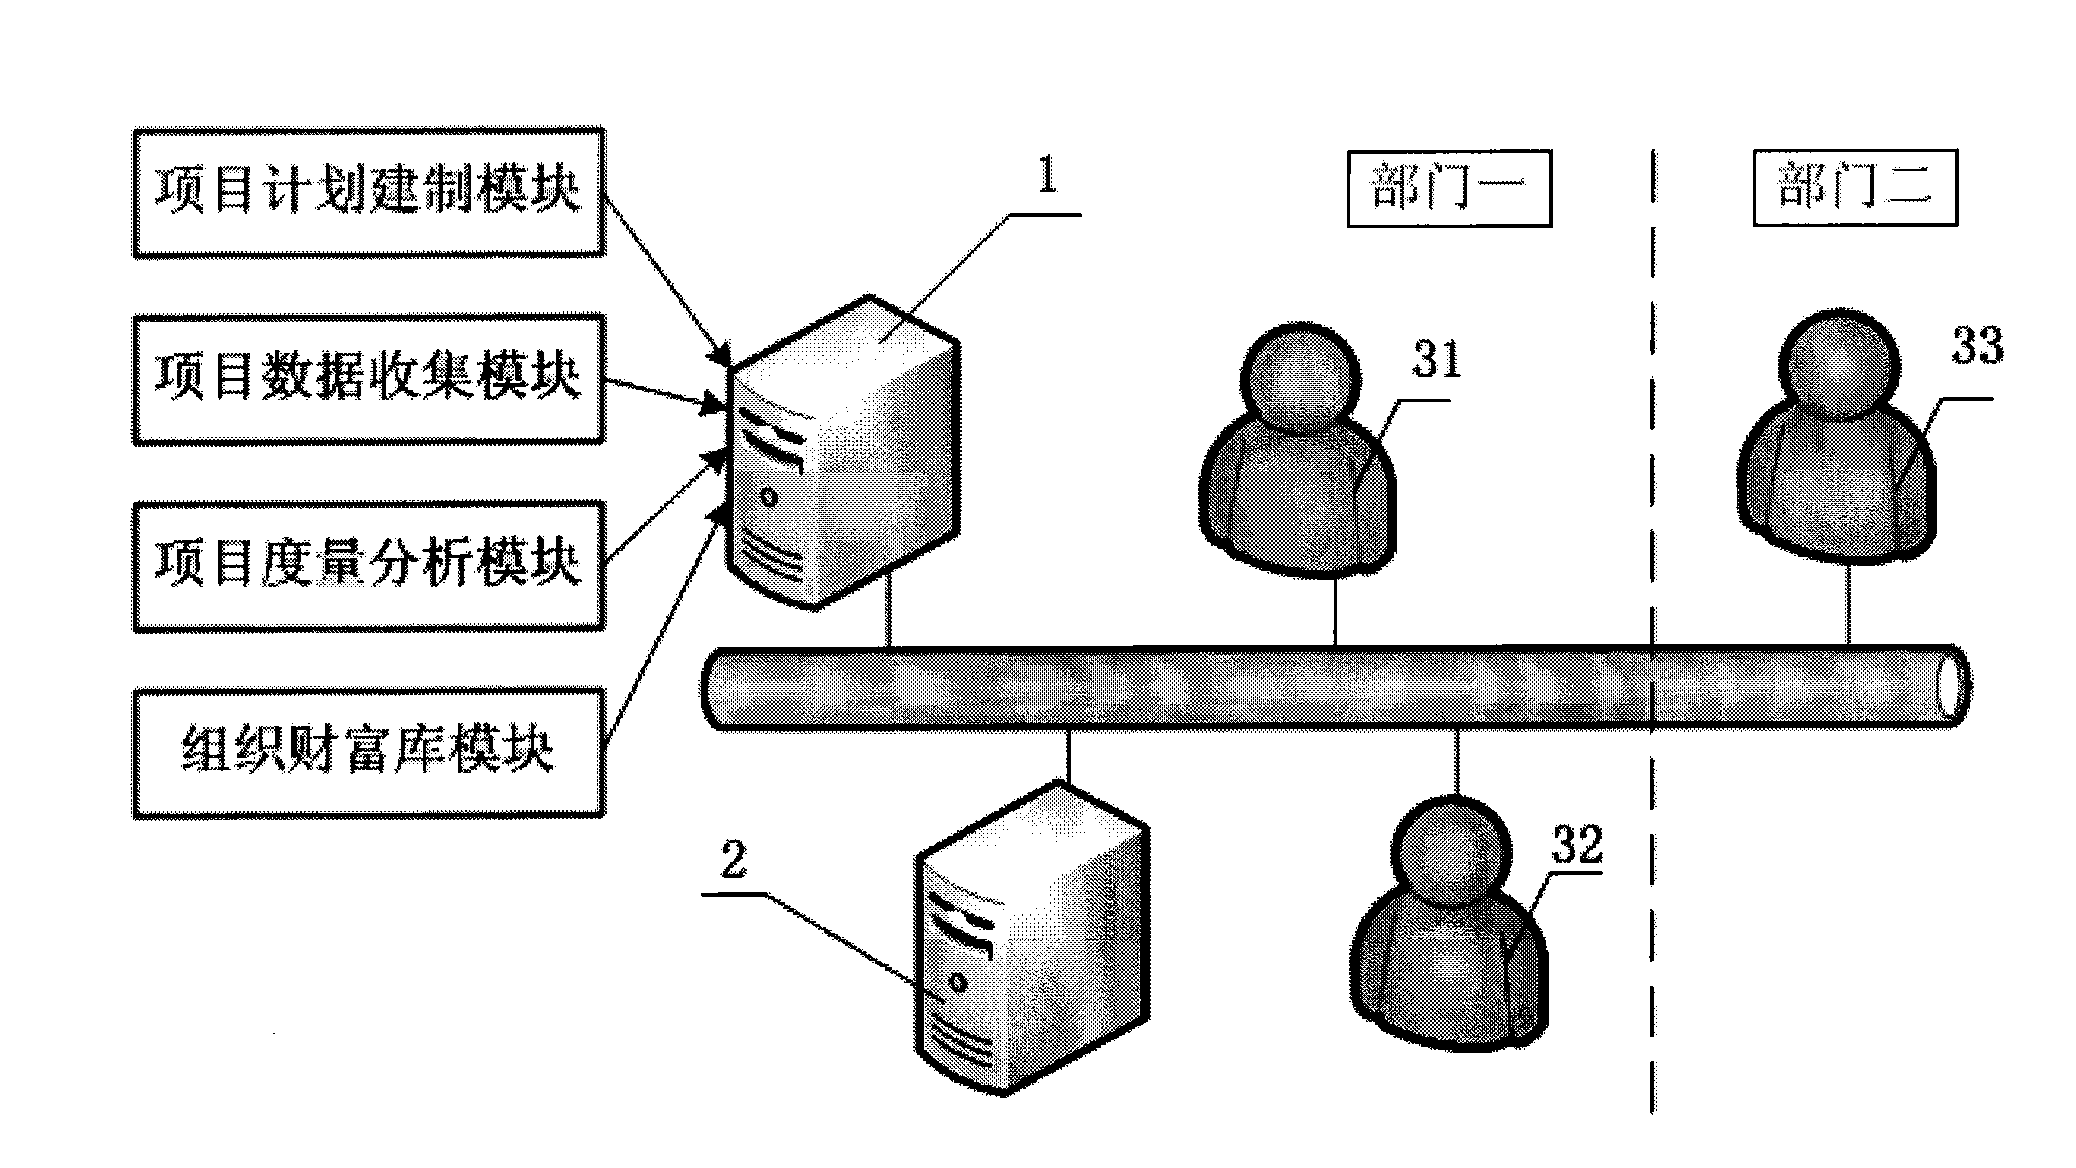 Integrated project management system and method